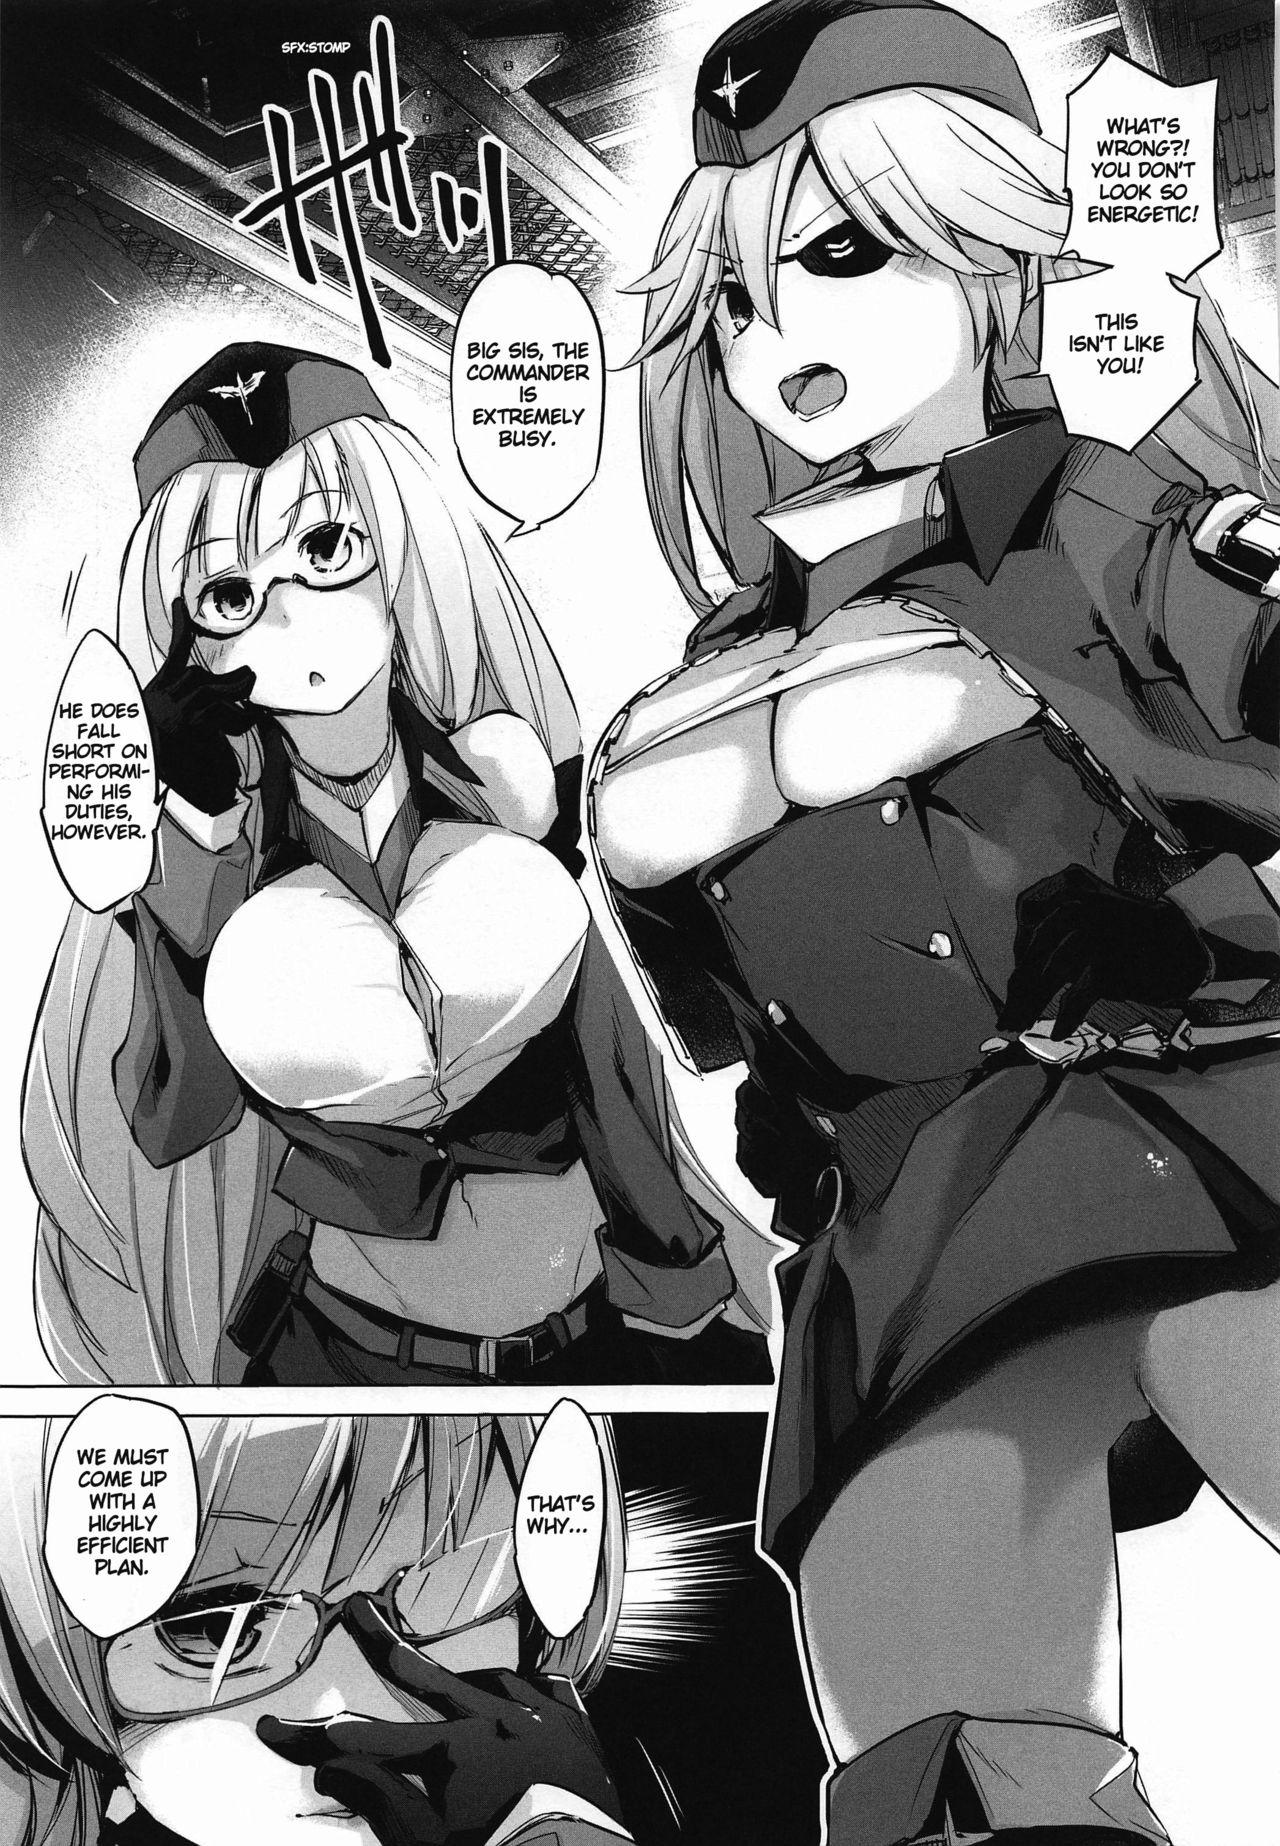 First Insufficient main force to shoot ! Iron-Blood Battleship and Battle Cruiser Summary Book - Azur lane Sex Pussy - Page 4